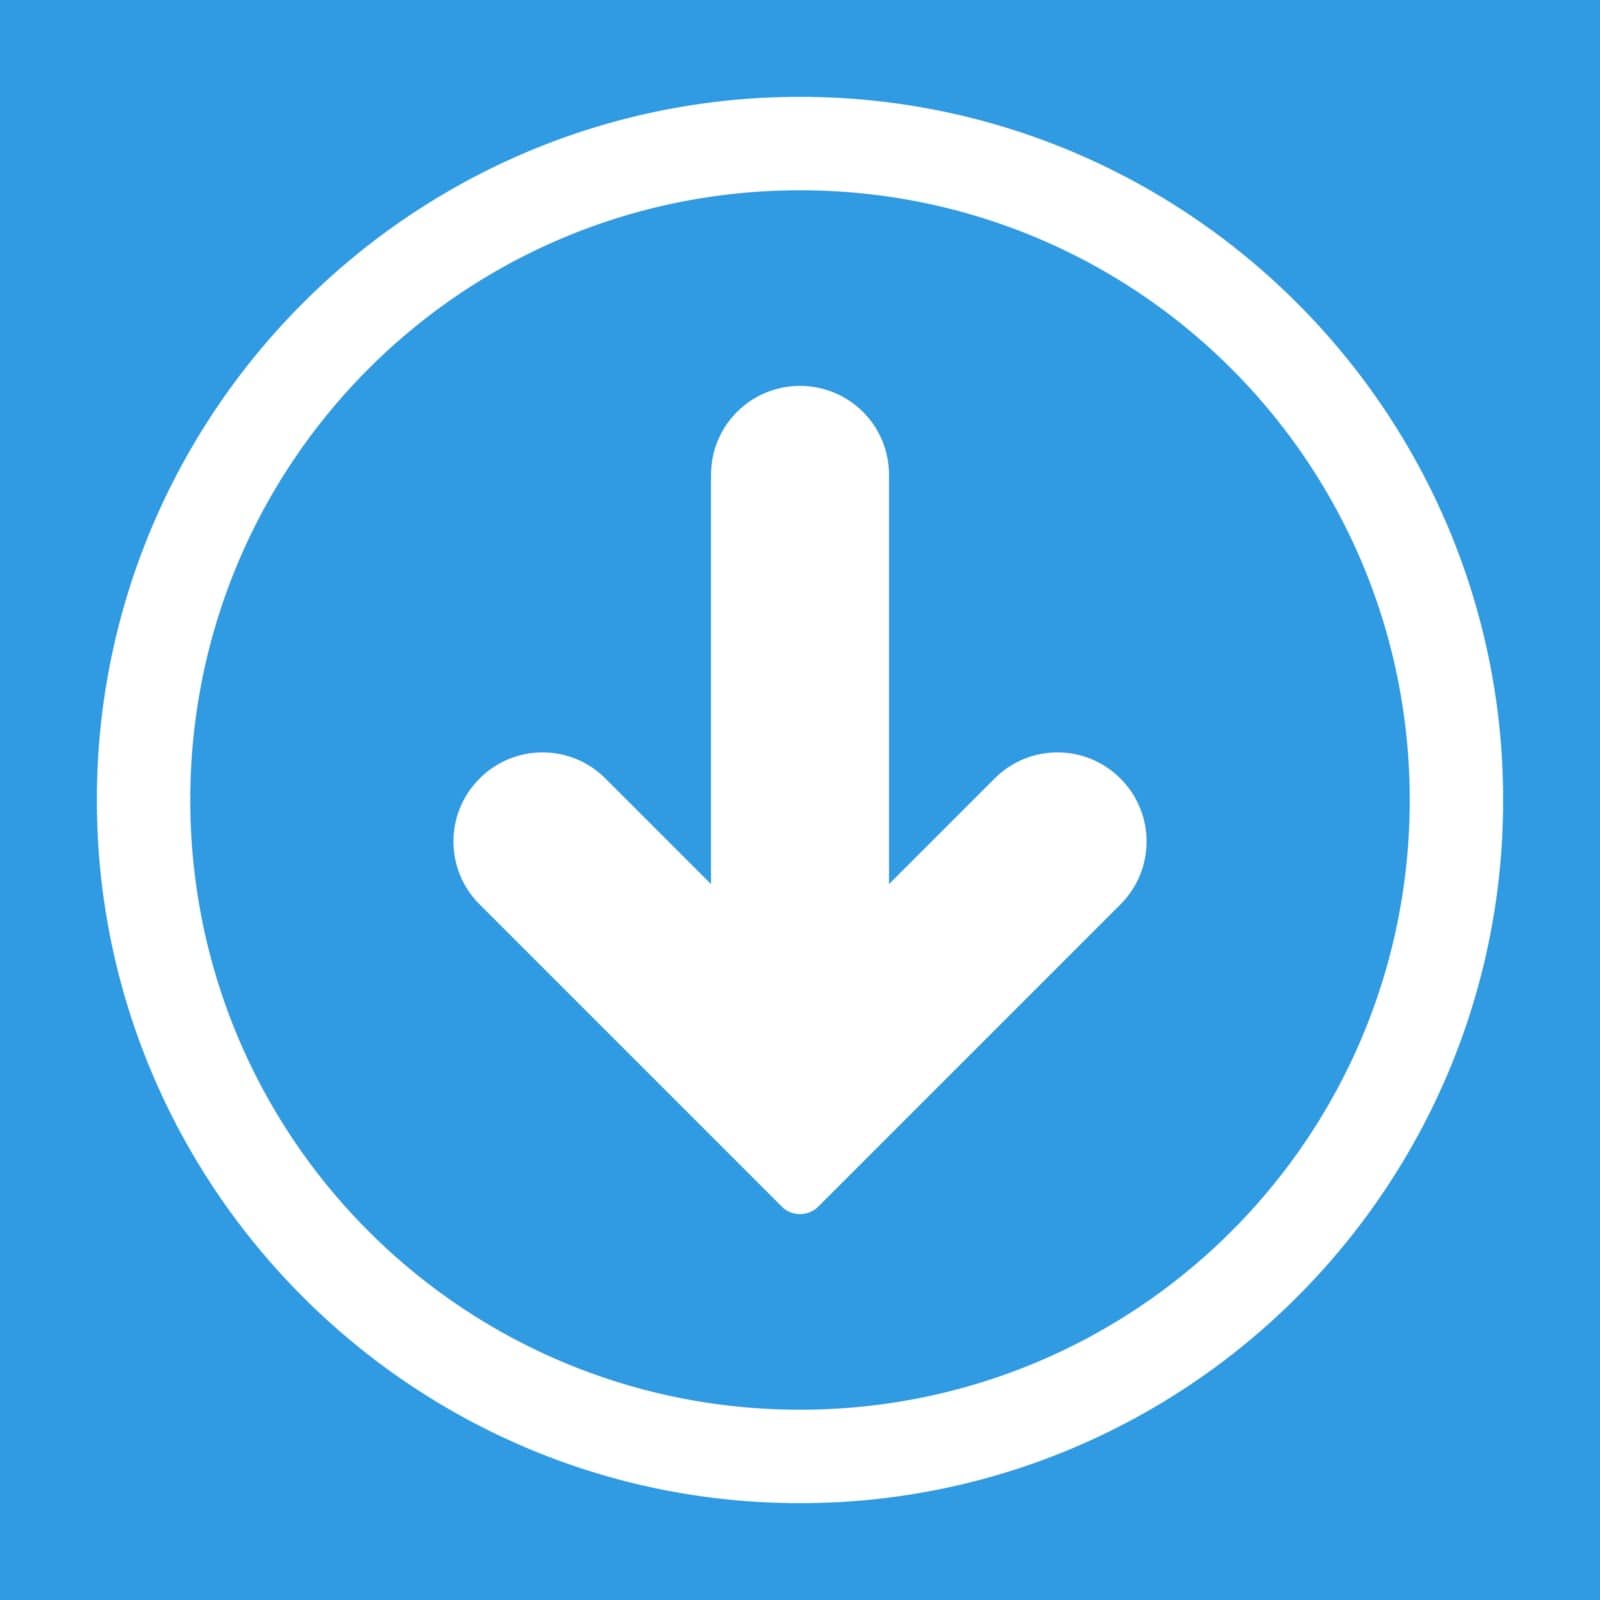 Arrow Down vector icon. This rounded flat symbol is drawn with white color on a blue background.